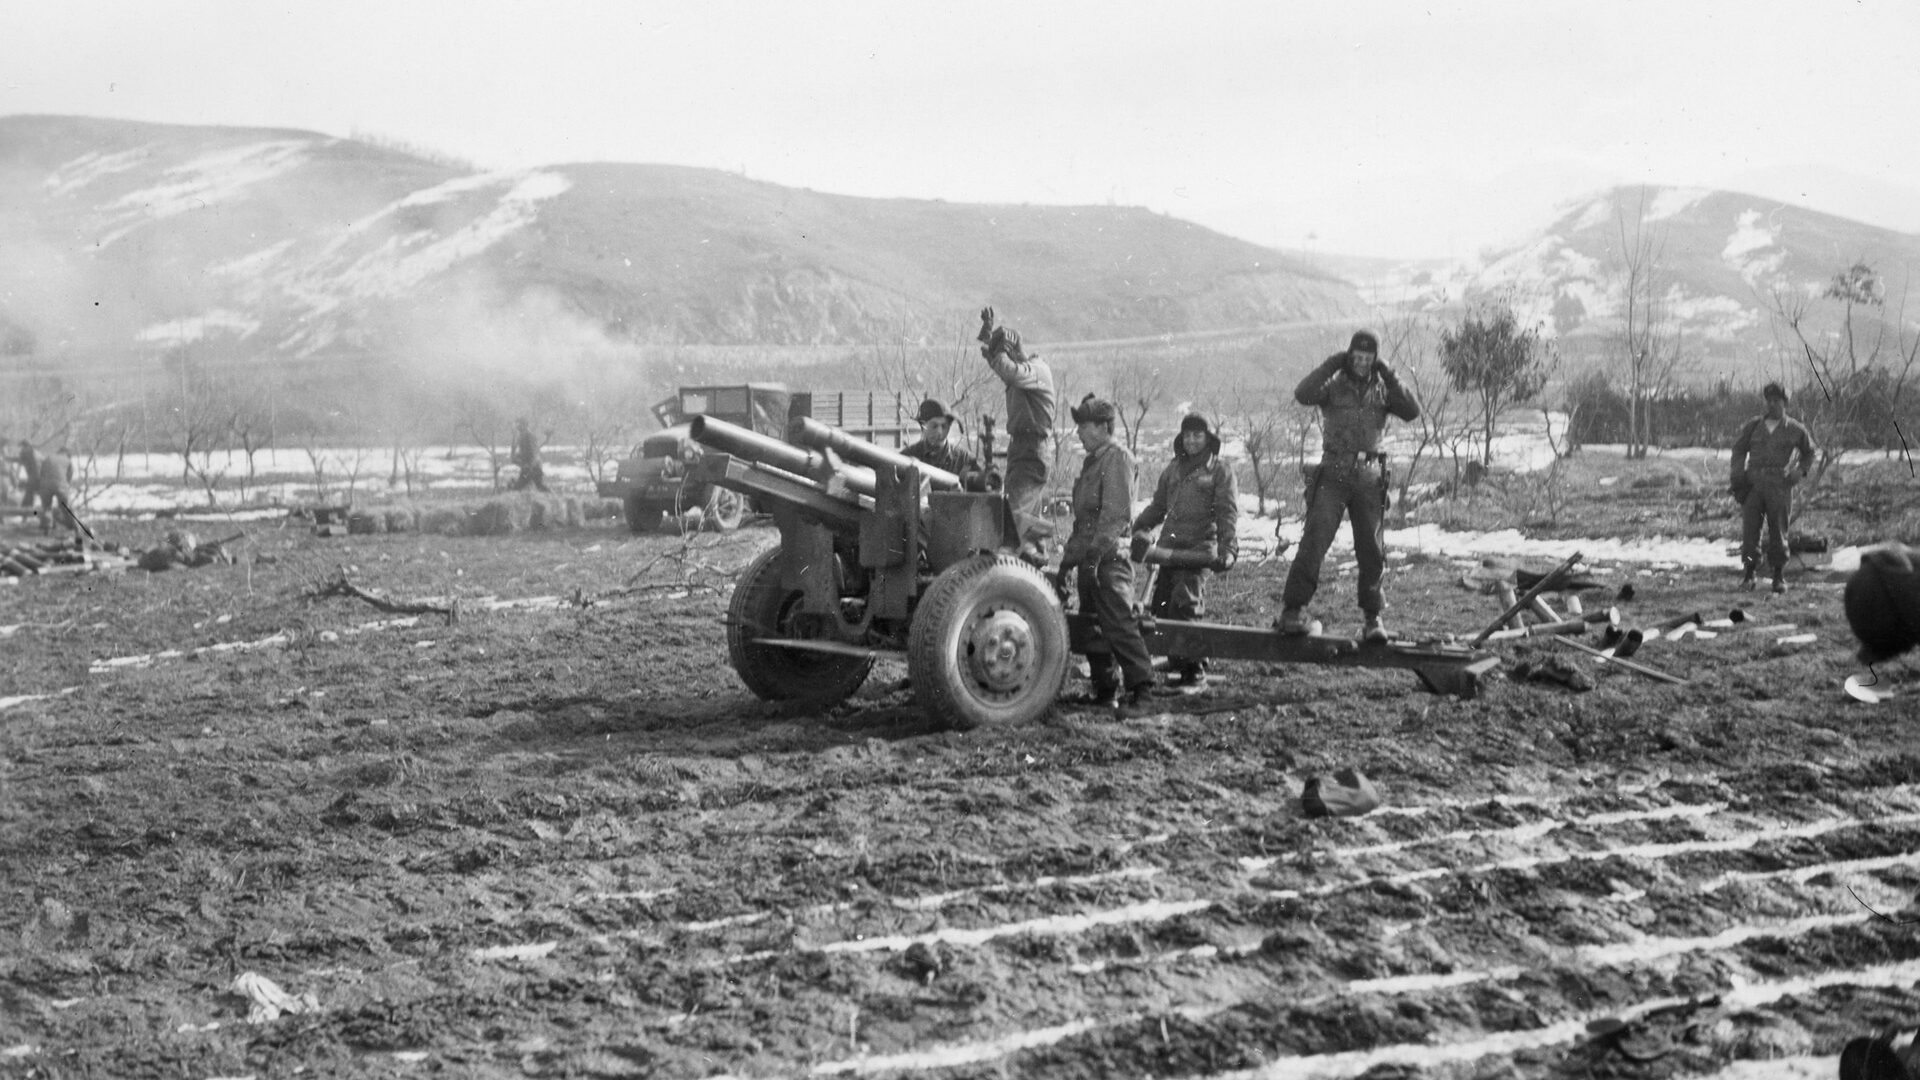 Artillerymen of the U.S. Army X Corps fire on enemy positions at the Chosin Reservoir.